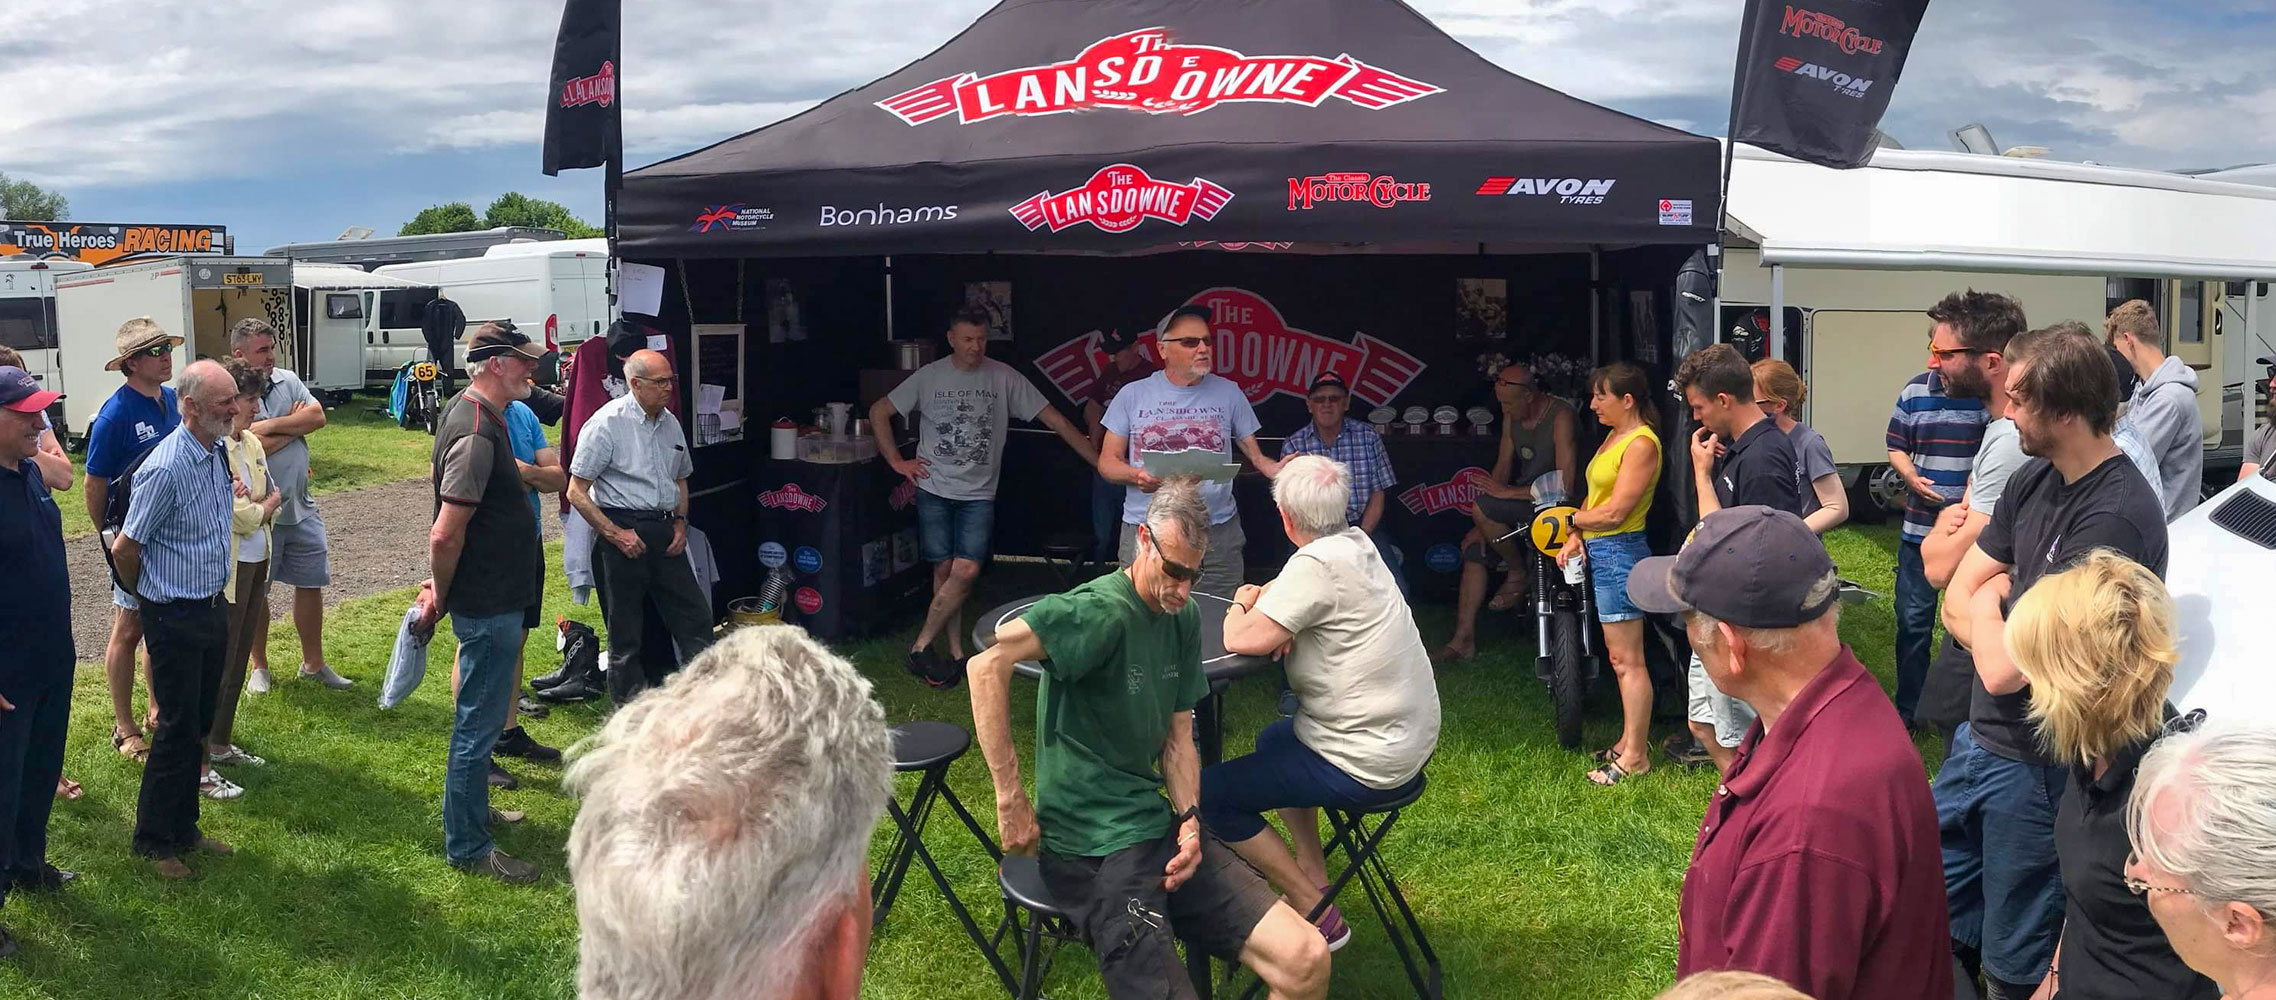 The Lansdowne prize giving at Cadwell Park